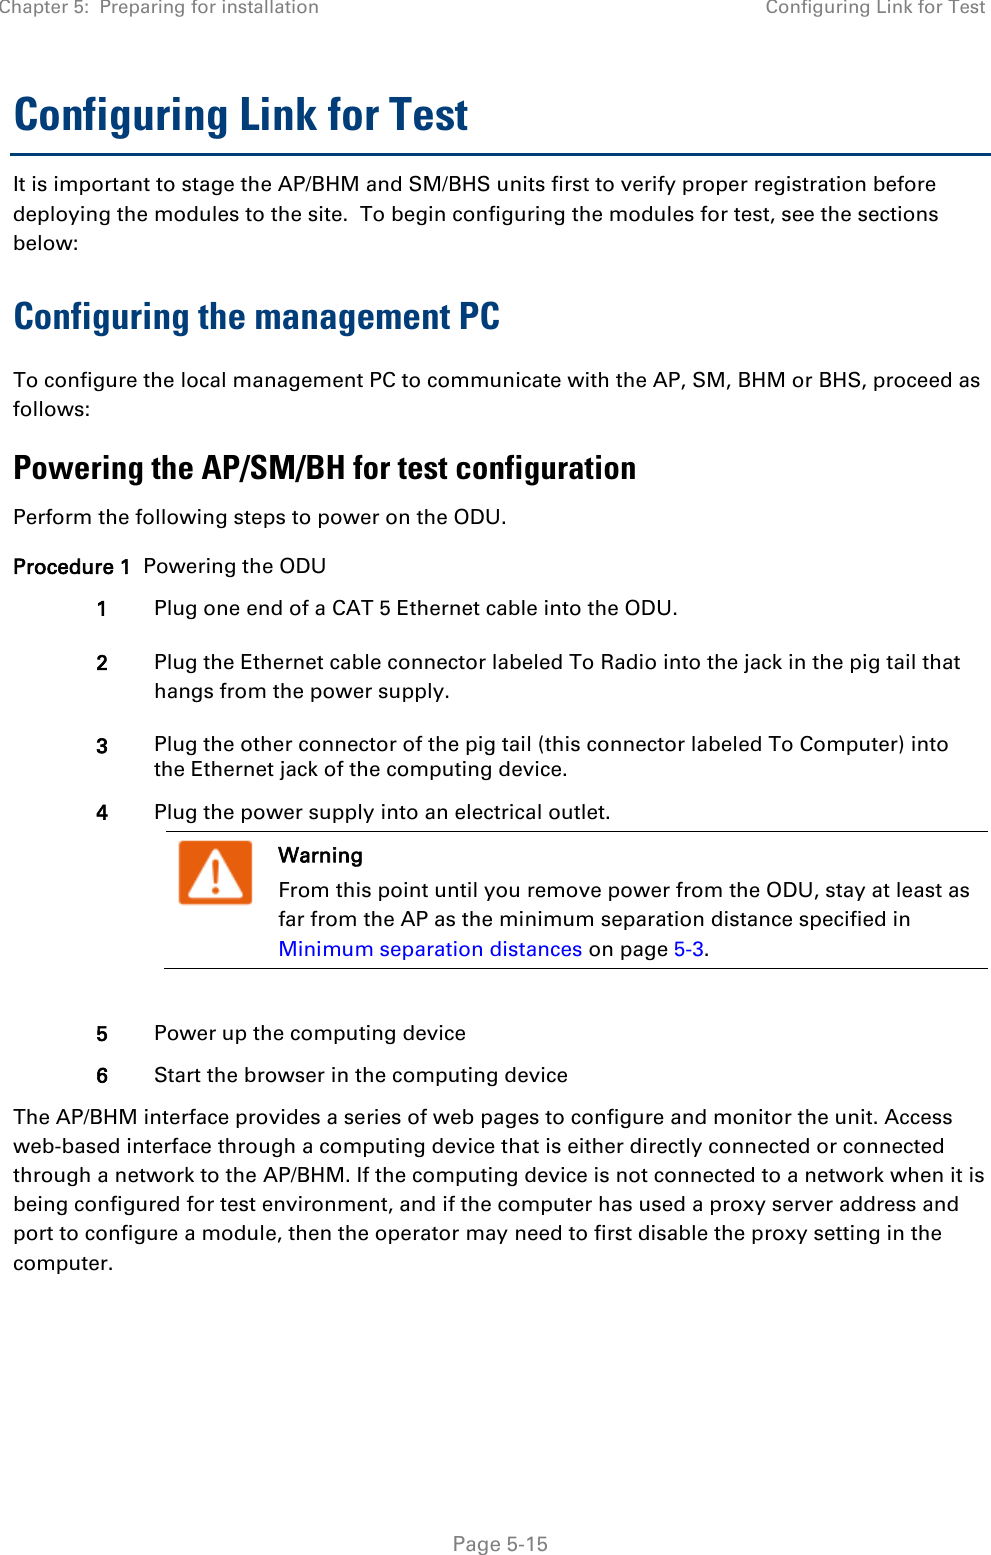 Chapter 5:  Preparing for installation Configuring Link for Test   Page 5-15 Configuring Link for Test It is important to stage the AP/BHM and SM/BHS units first to verify proper registration before deploying the modules to the site.  To begin configuring the modules for test, see the sections below: Configuring the management PC To configure the local management PC to communicate with the AP, SM, BHM or BHS, proceed as follows: Powering the AP/SM/BH for test configuration Perform the following steps to power on the ODU. Procedure 1  Powering the ODU 1 Plug one end of a CAT 5 Ethernet cable into the ODU. 2 Plug the Ethernet cable connector labeled To Radio into the jack in the pig tail that hangs from the power supply. 3 Plug the other connector of the pig tail (this connector labeled To Computer) into the Ethernet jack of the computing device. 4 Plug the power supply into an electrical outlet.  Warning From this point until you remove power from the ODU, stay at least as far from the AP as the minimum separation distance specified in Minimum separation distances on page 5-3.   5 Power up the computing device 6 Start the browser in the computing device The AP/BHM interface provides a series of web pages to configure and monitor the unit. Access web-based interface through a computing device that is either directly connected or connected through a network to the AP/BHM. If the computing device is not connected to a network when it is being configured for test environment, and if the computer has used a proxy server address and port to configure a module, then the operator may need to first disable the proxy setting in the computer.      